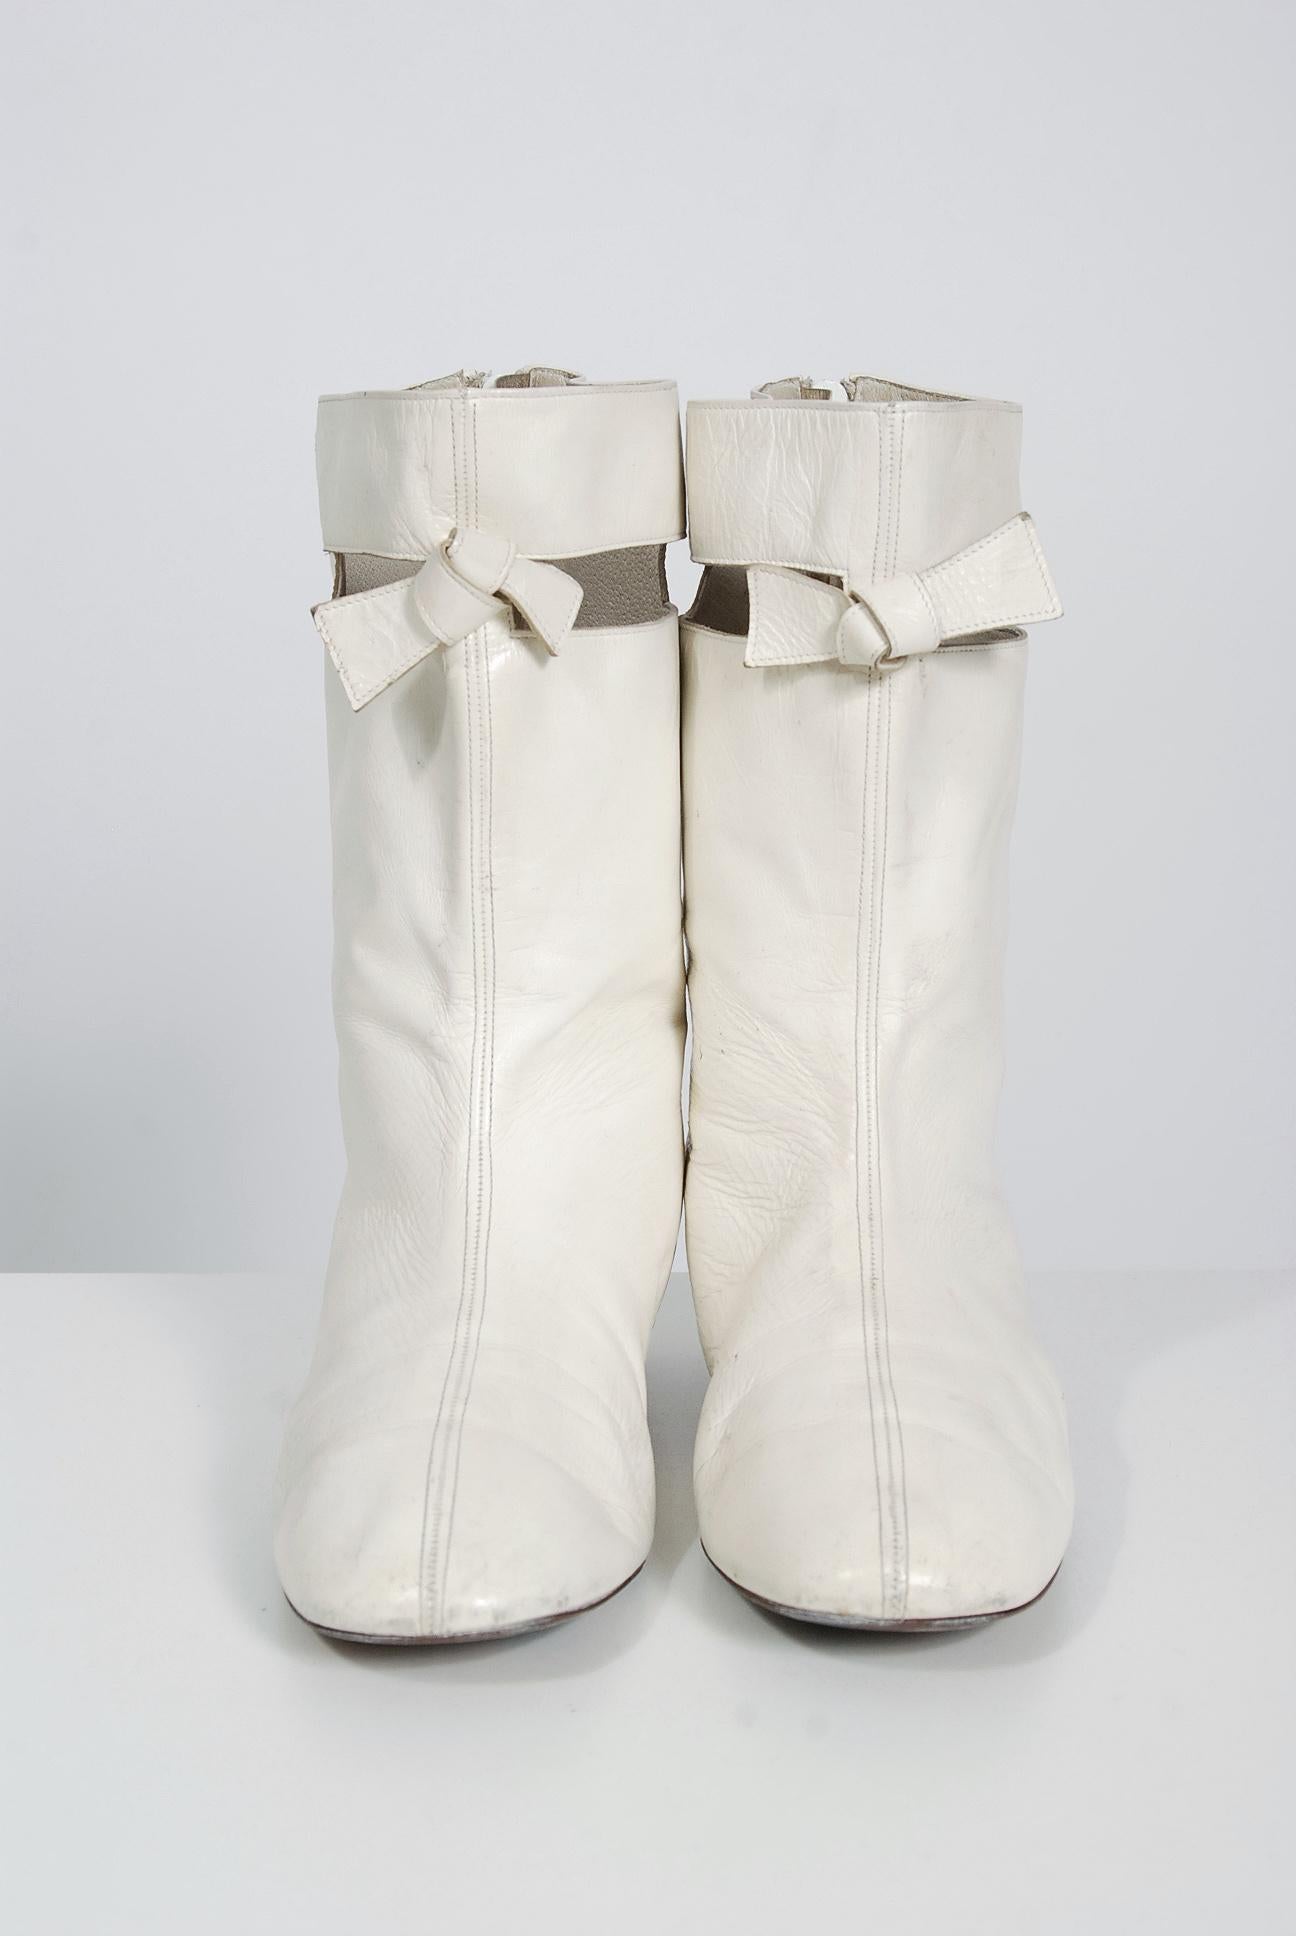 Courreges Couture White Leather Cut Out Mod Space Age Flat Go-Go Boots, 1965